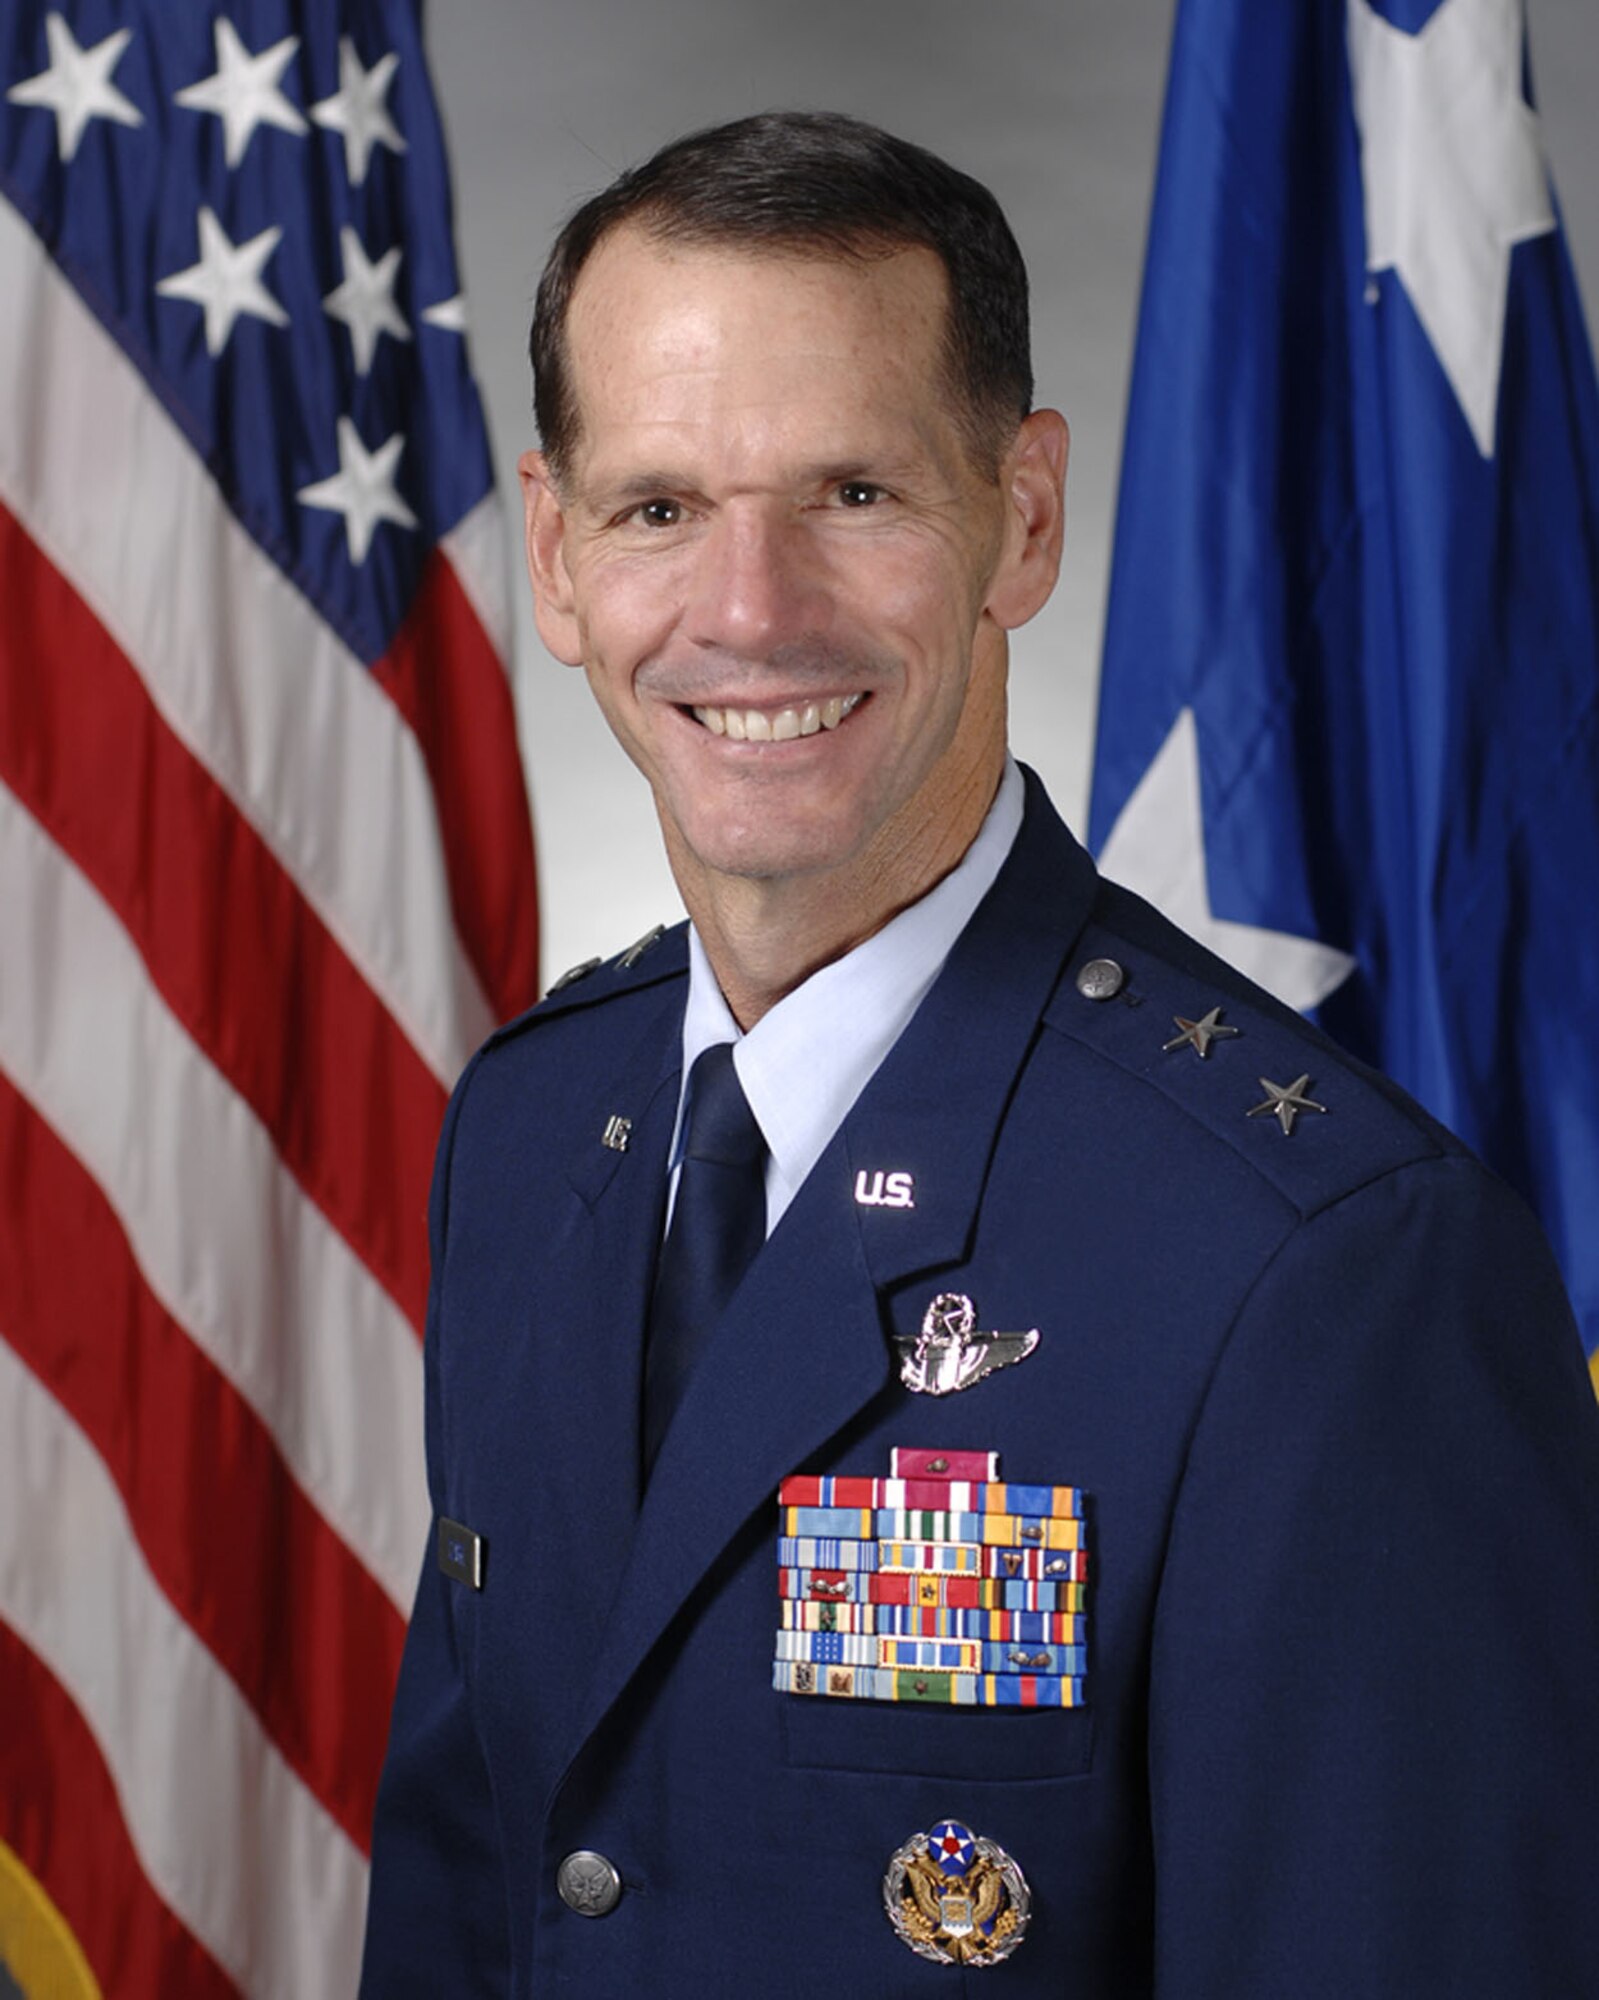 Maj. Gen. Stanley E. Clarke III, who has been selected for promotion to lieutenant general, will assume responsibility of the Component Numbered Air Force at Tyndall Aug. 31. Clarke is currently serving as the Senior Defense Official and Defense Attaché for United States European Command in Ankara, Turkey. (Courtesy photo)